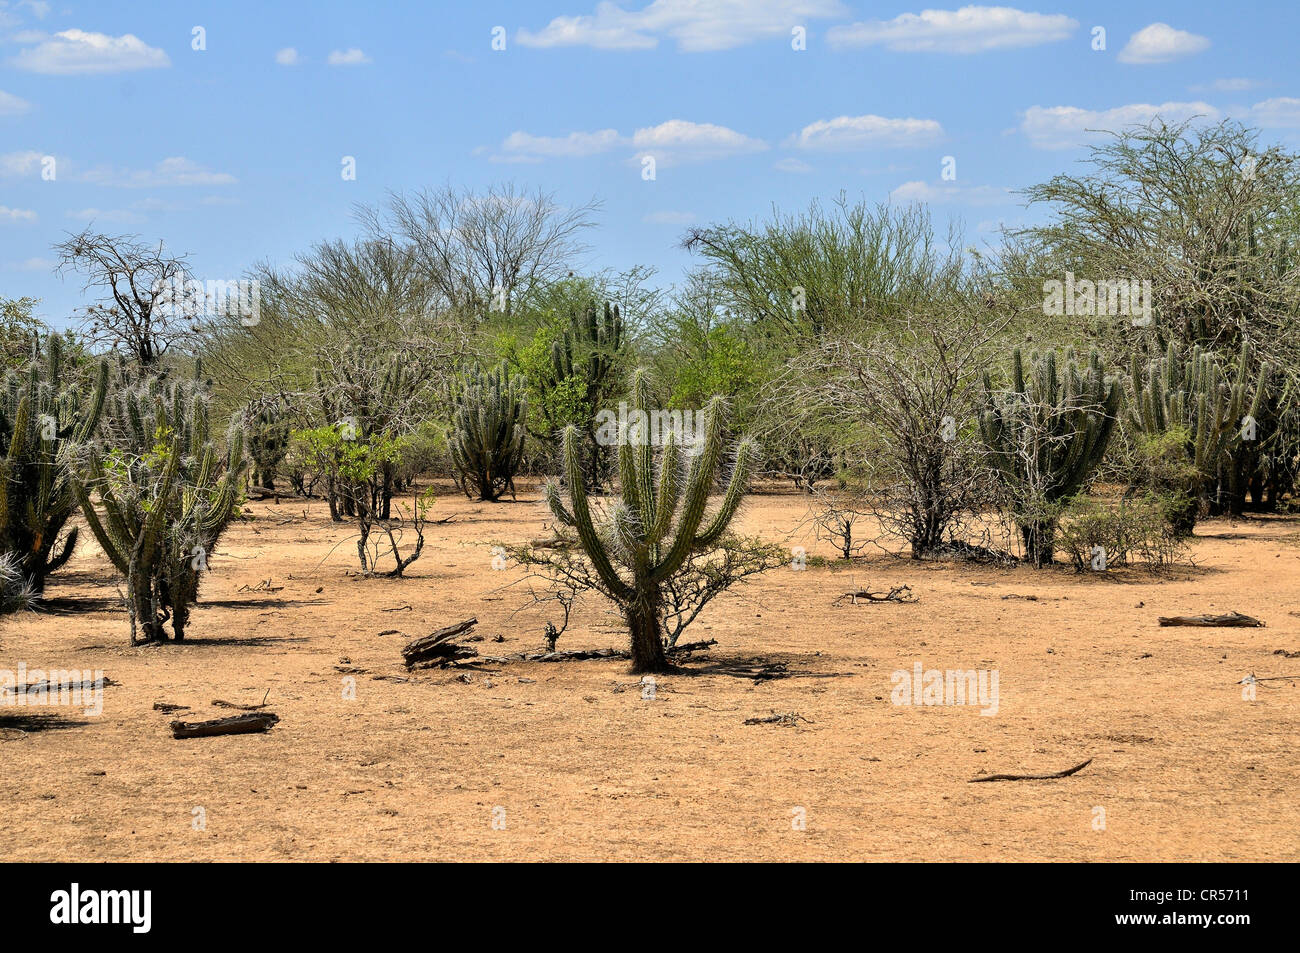 Chaco region photography images - Alamy